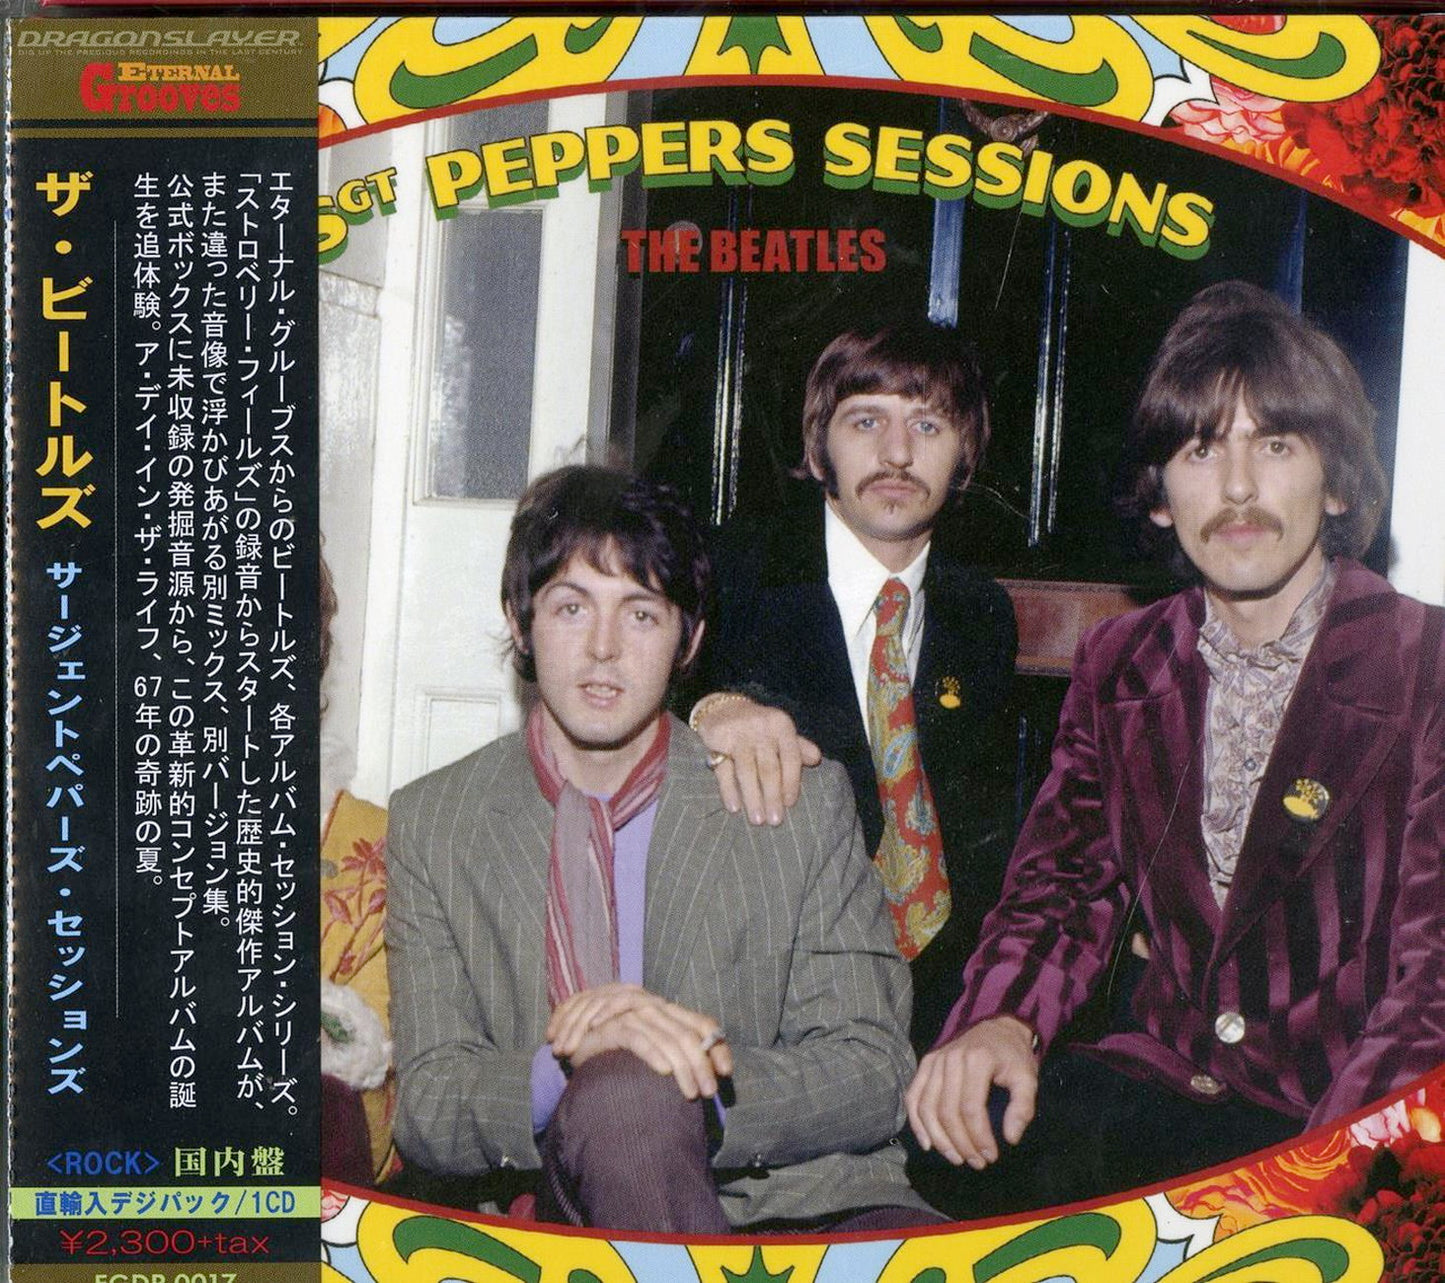 The Beatles - Sgt. Peppers Sessions - Japan CD